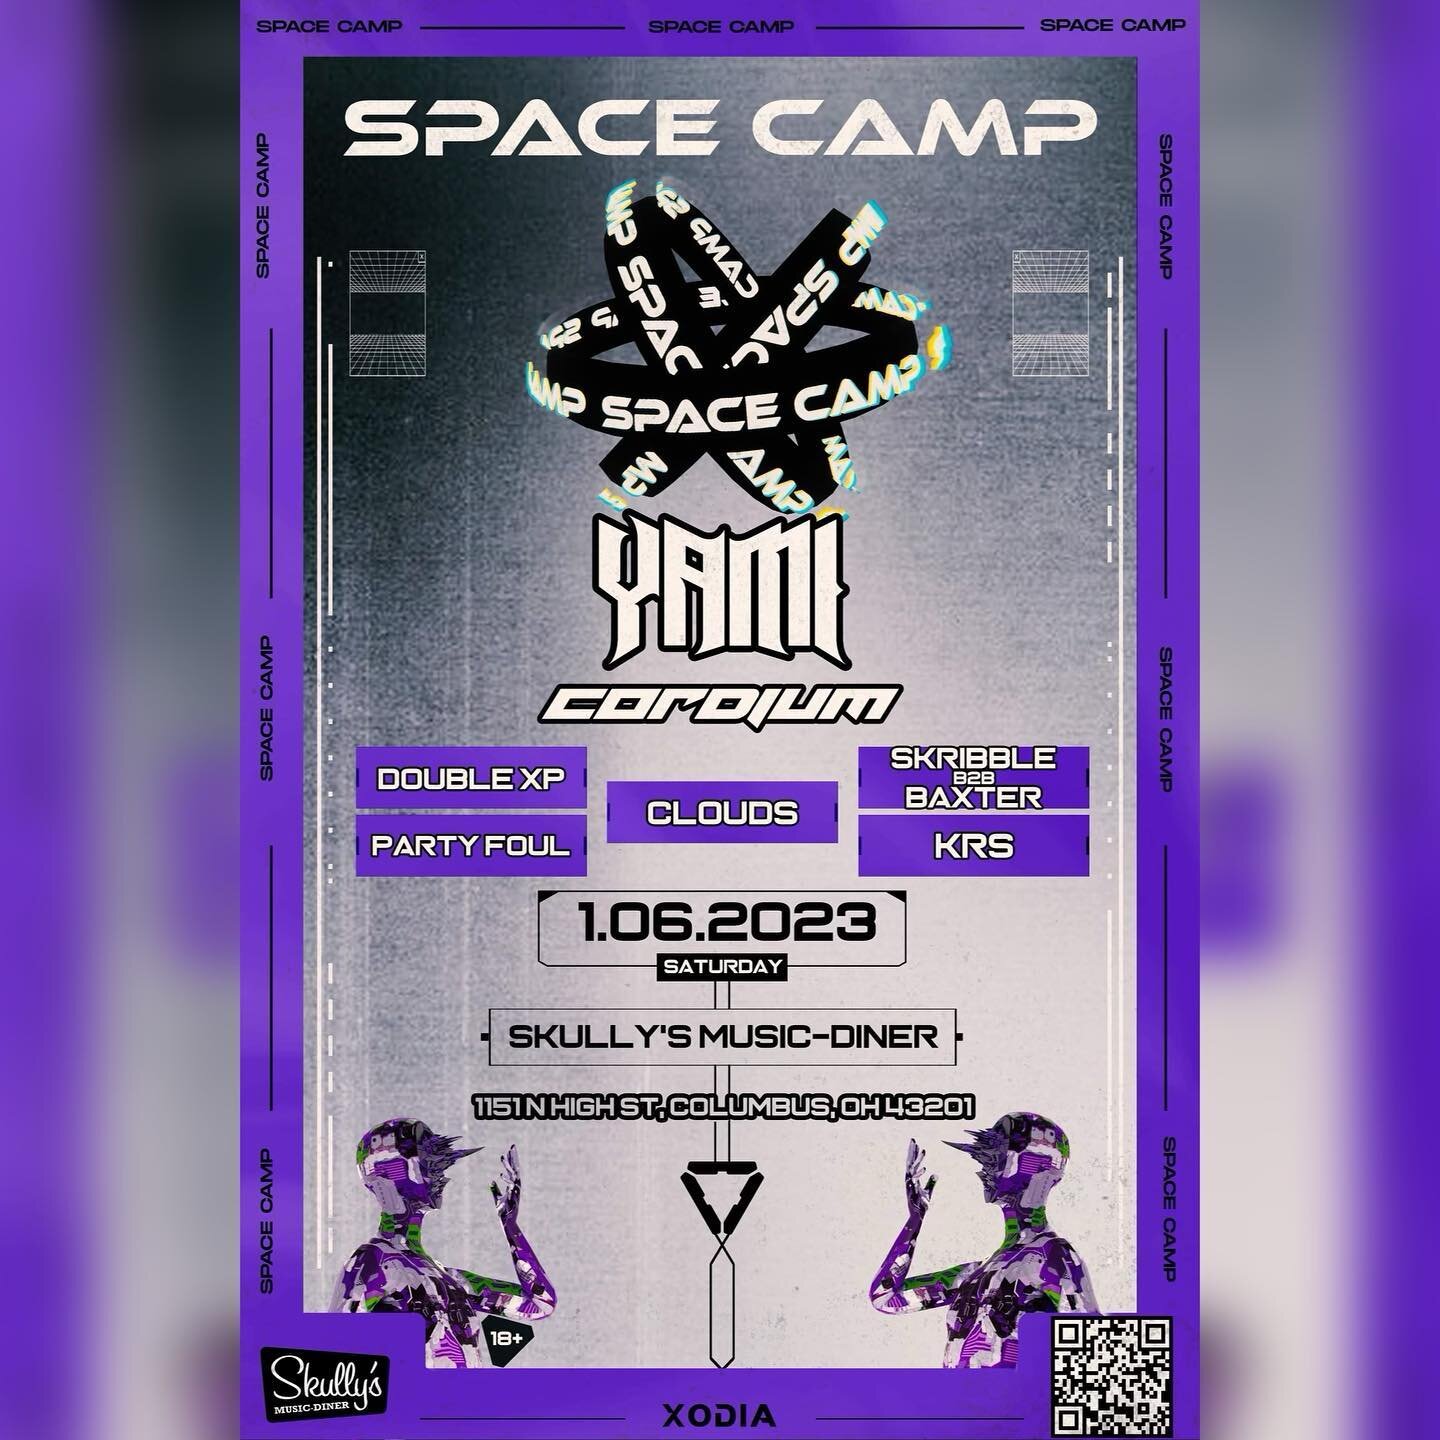 stoked to be running direct support for my boy @yami_music on 1/6 for Space Camp‼️

big ups to @xodiamg for having me out

first shows i played as CORDIUM were for Space Camp so it&rsquo;s a pleasure to be back as direct support for an absolute UNIT 